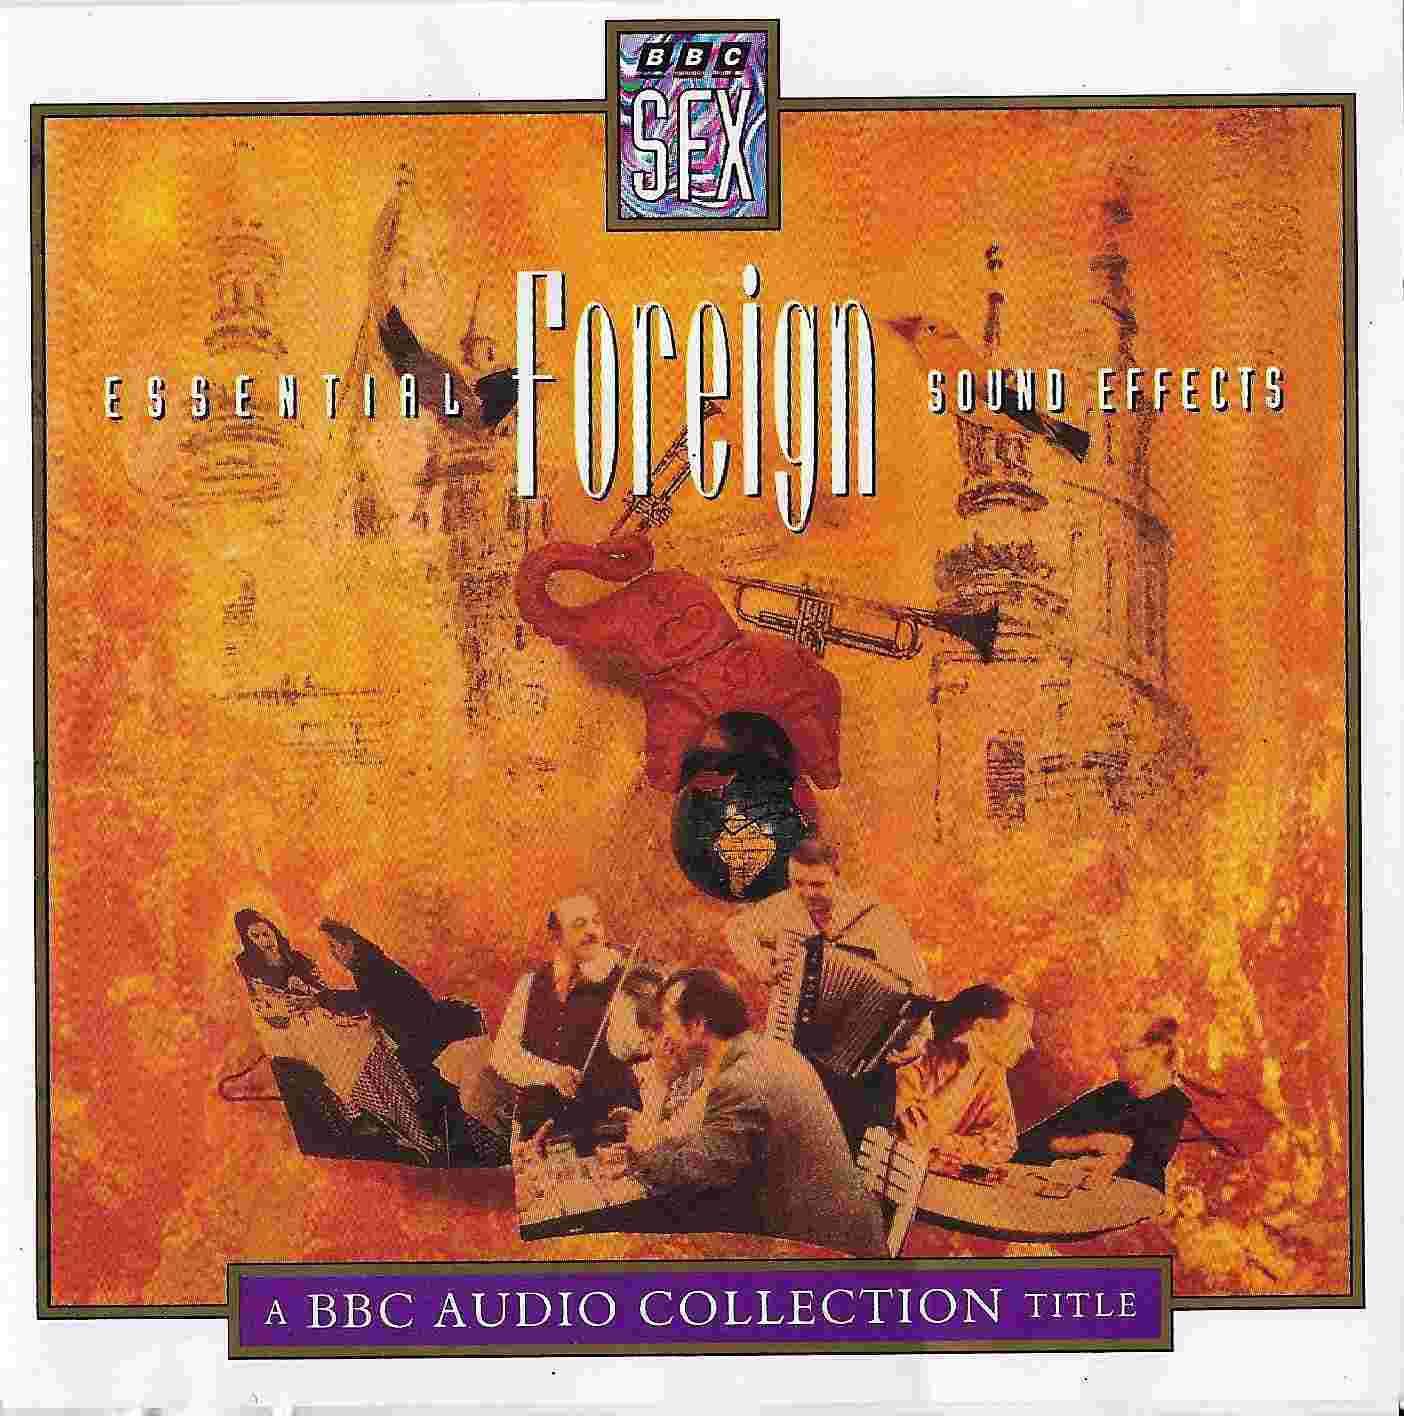 Picture of BBCCD870 Essential foreign sound effects by artist Various from the BBC cds - Records and Tapes library